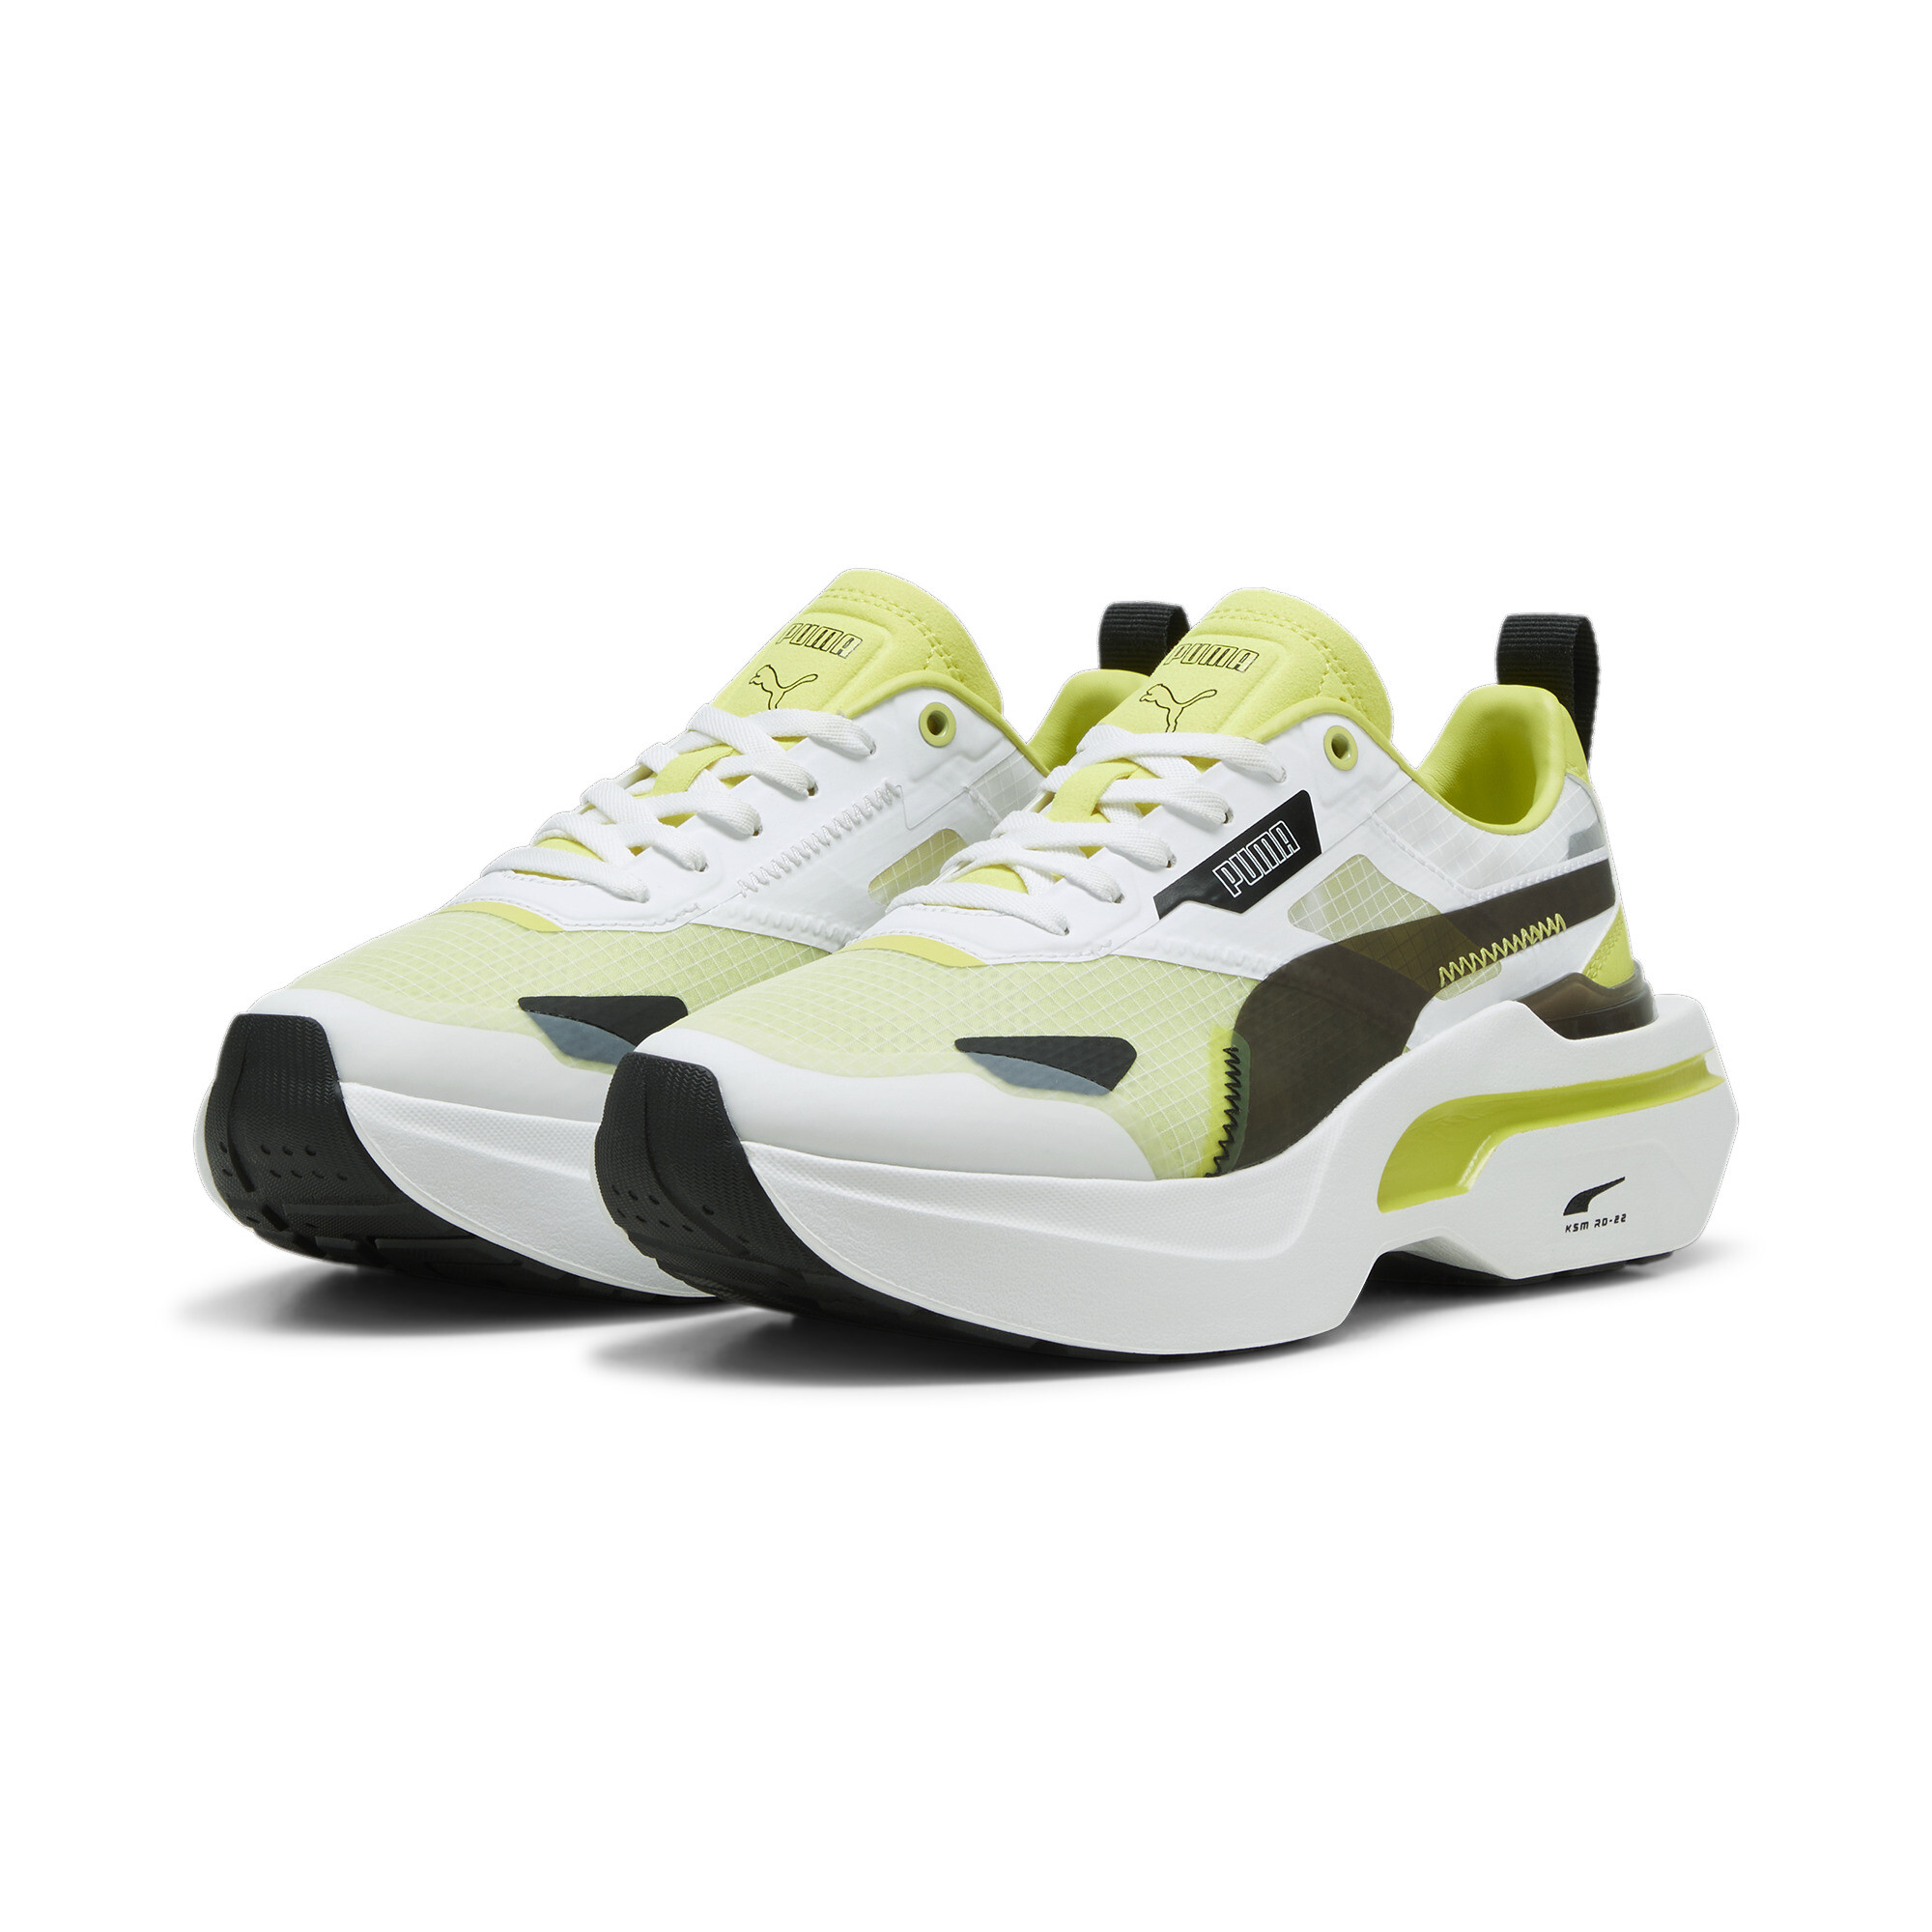 Women's Puma Kosmo Rider's Trainers, White, Size 38.5, Shoes